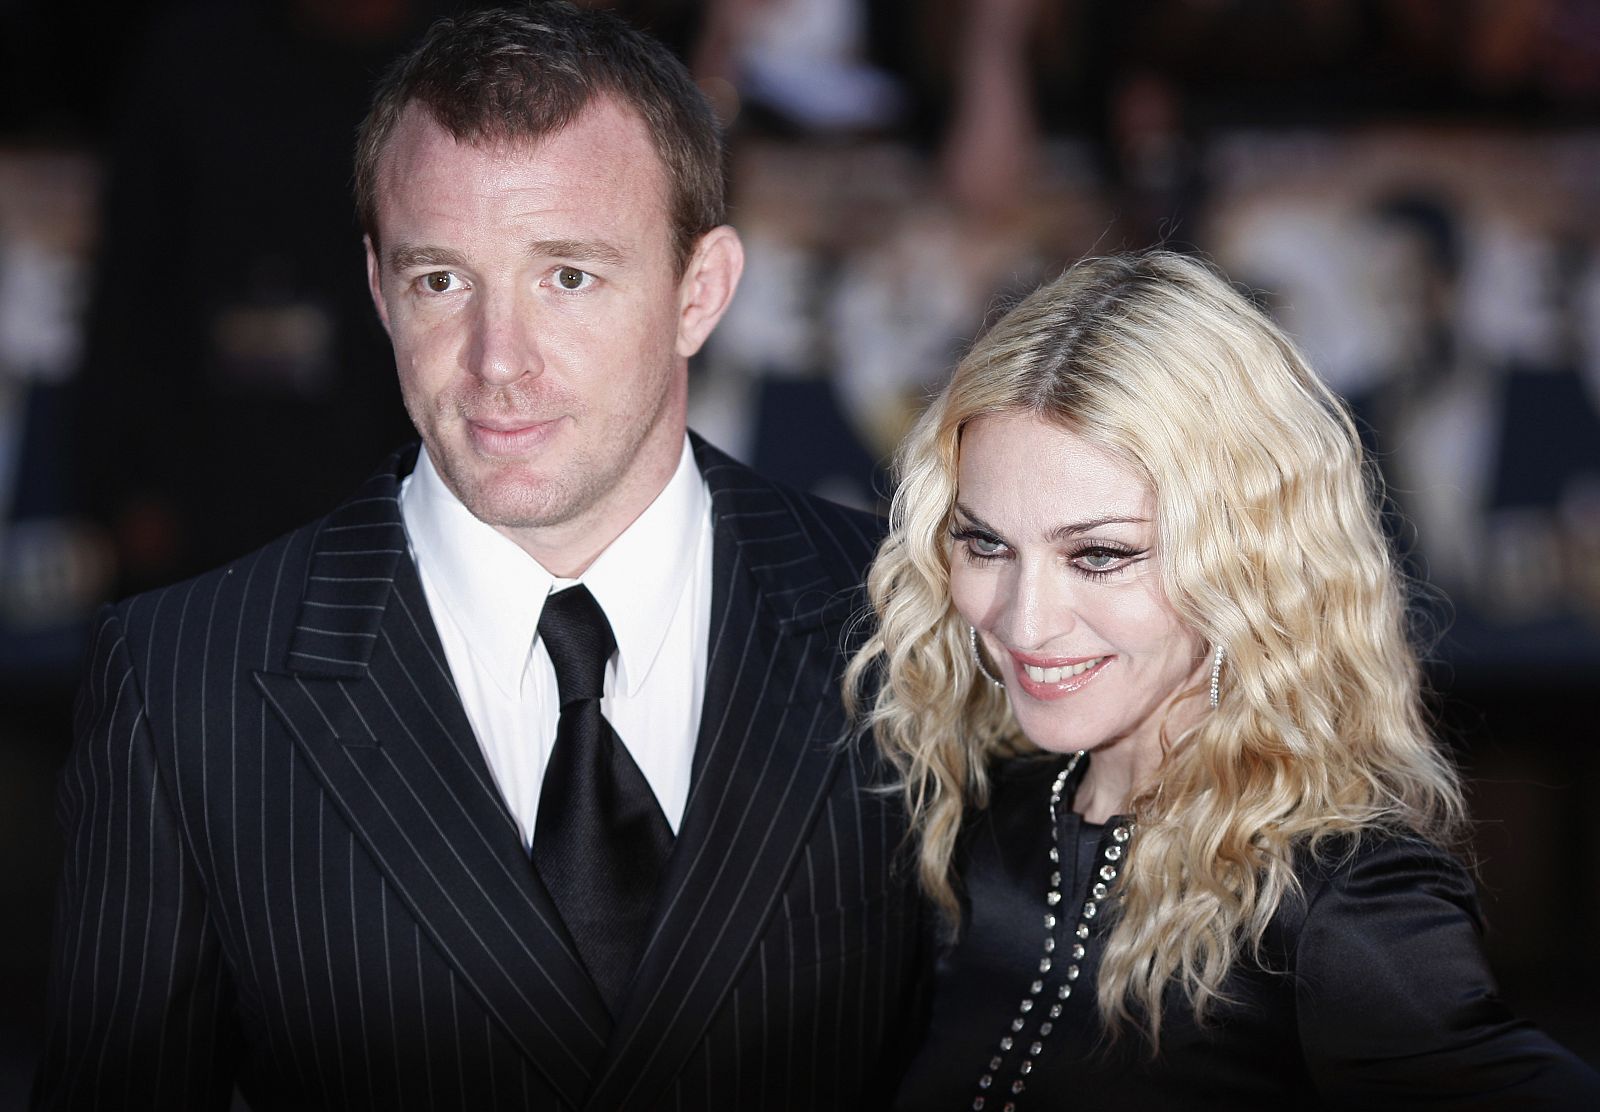 Director Guy Ritchie and wife Madonna arrive for the world premiere of "RocknRolla" at the Odeon cinema in London